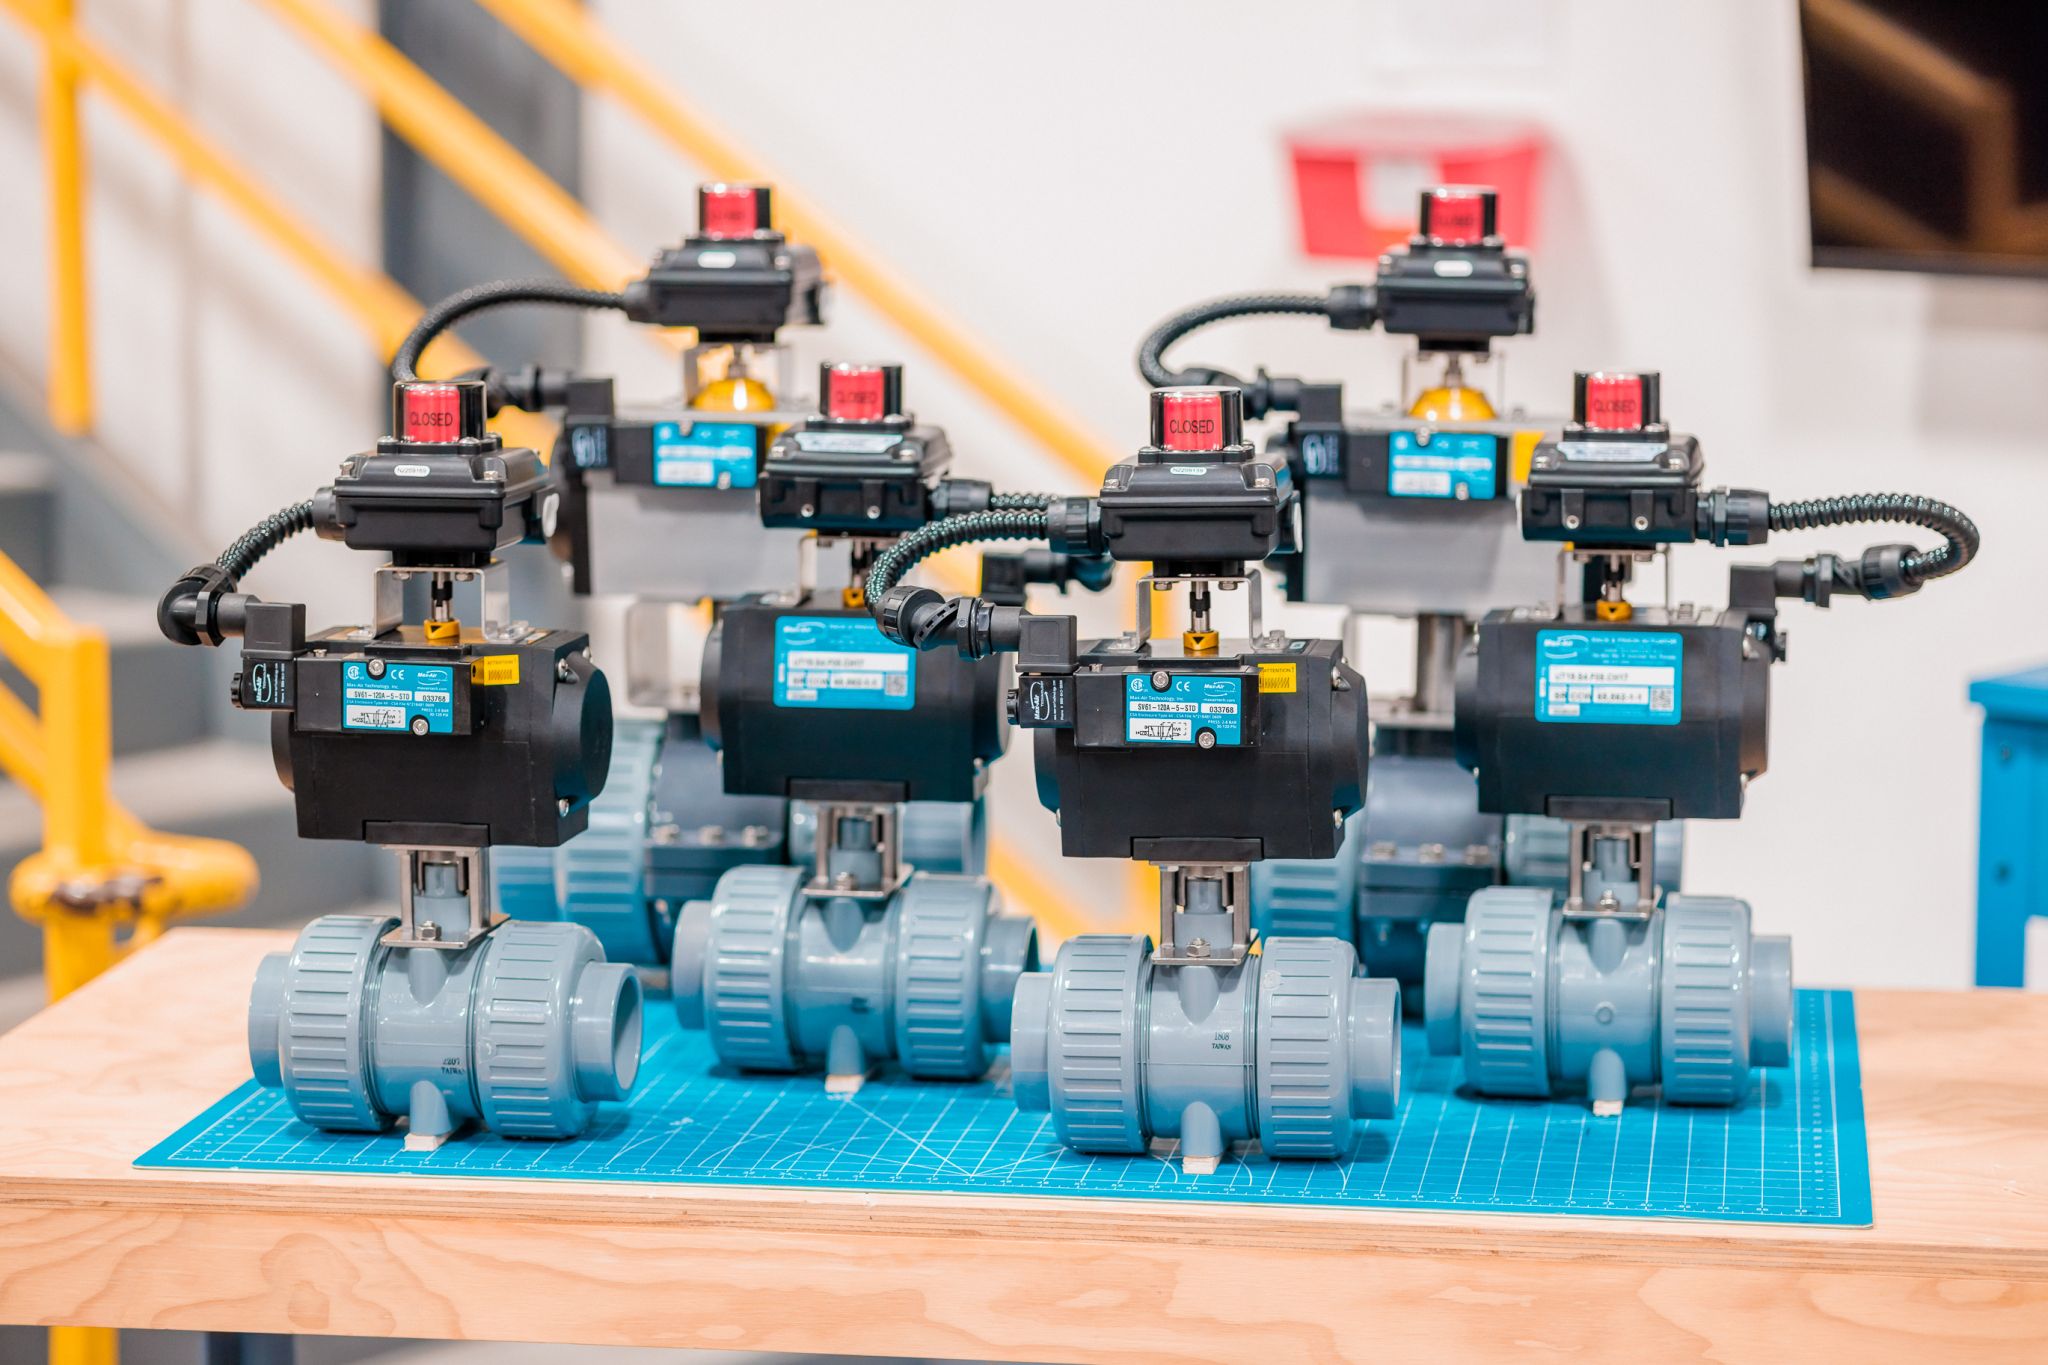 Plastic Ball Valves w/ Solenoid, Limit Switch Boxes, Termination, & Actuators in Both Aluminum and Technopolymer